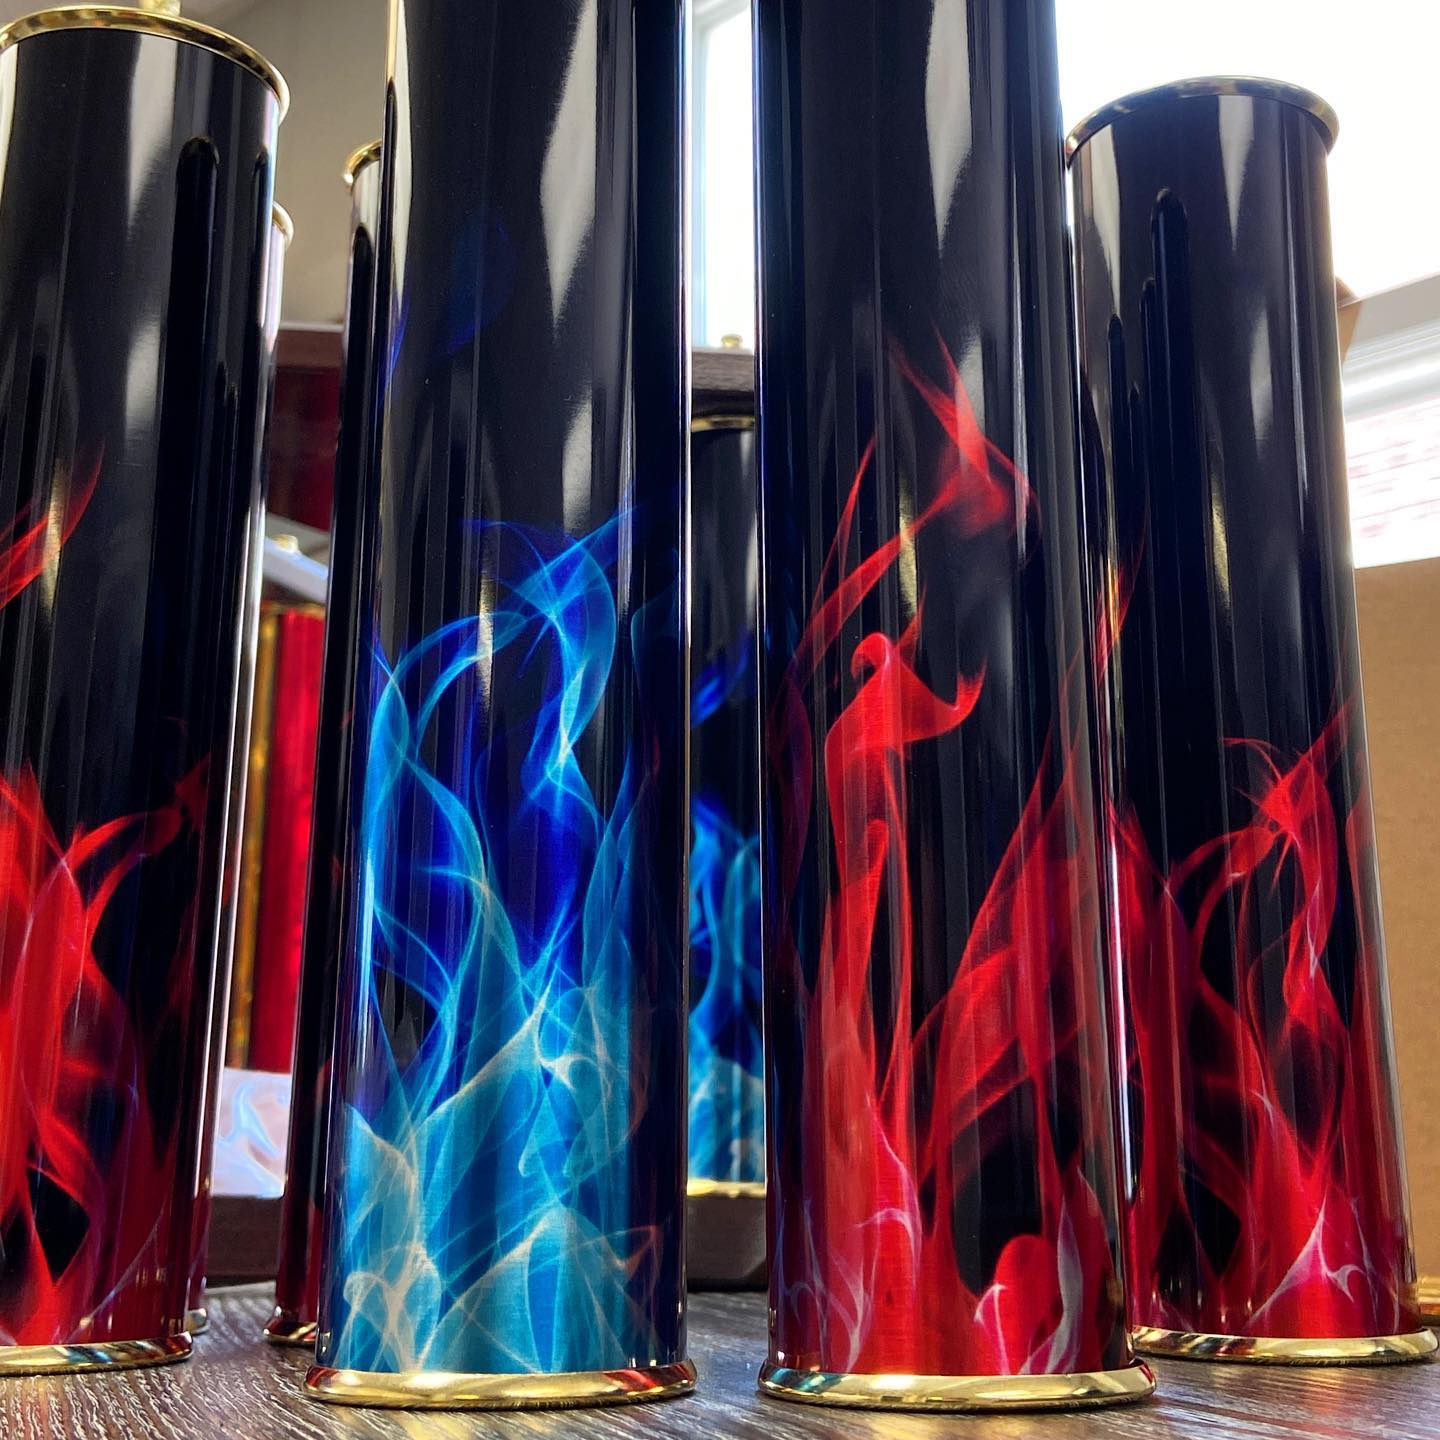 Blue flames or red flames? #thisorthat #customtrophies #carshowseason